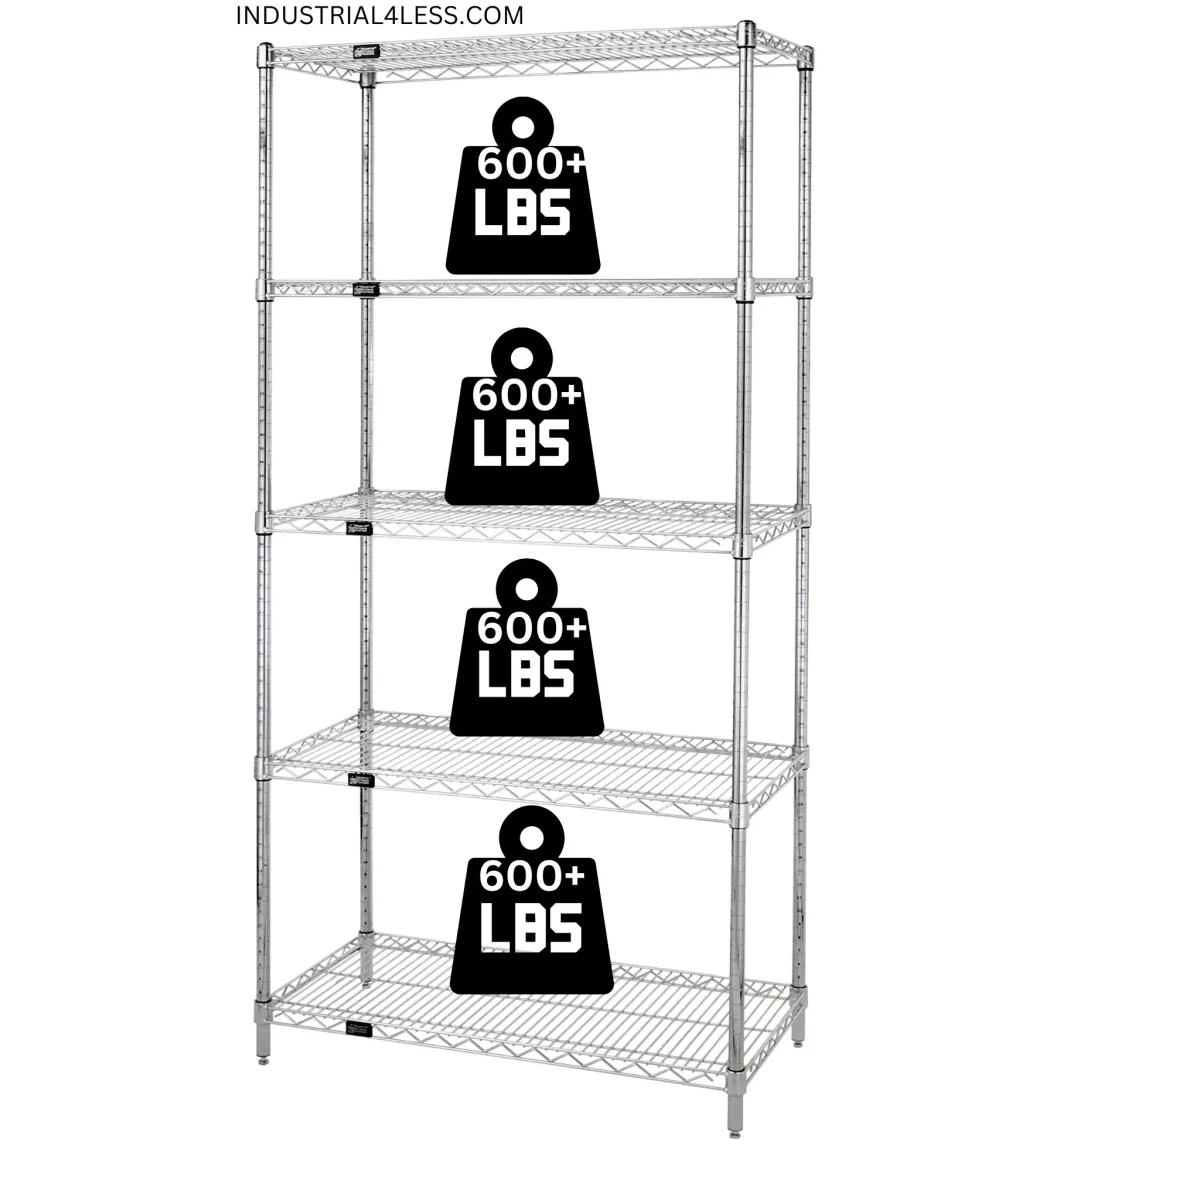 24" x 48" Stainless Steel Wire Shelving Unit - Industrial 4 Less - 24485S-5